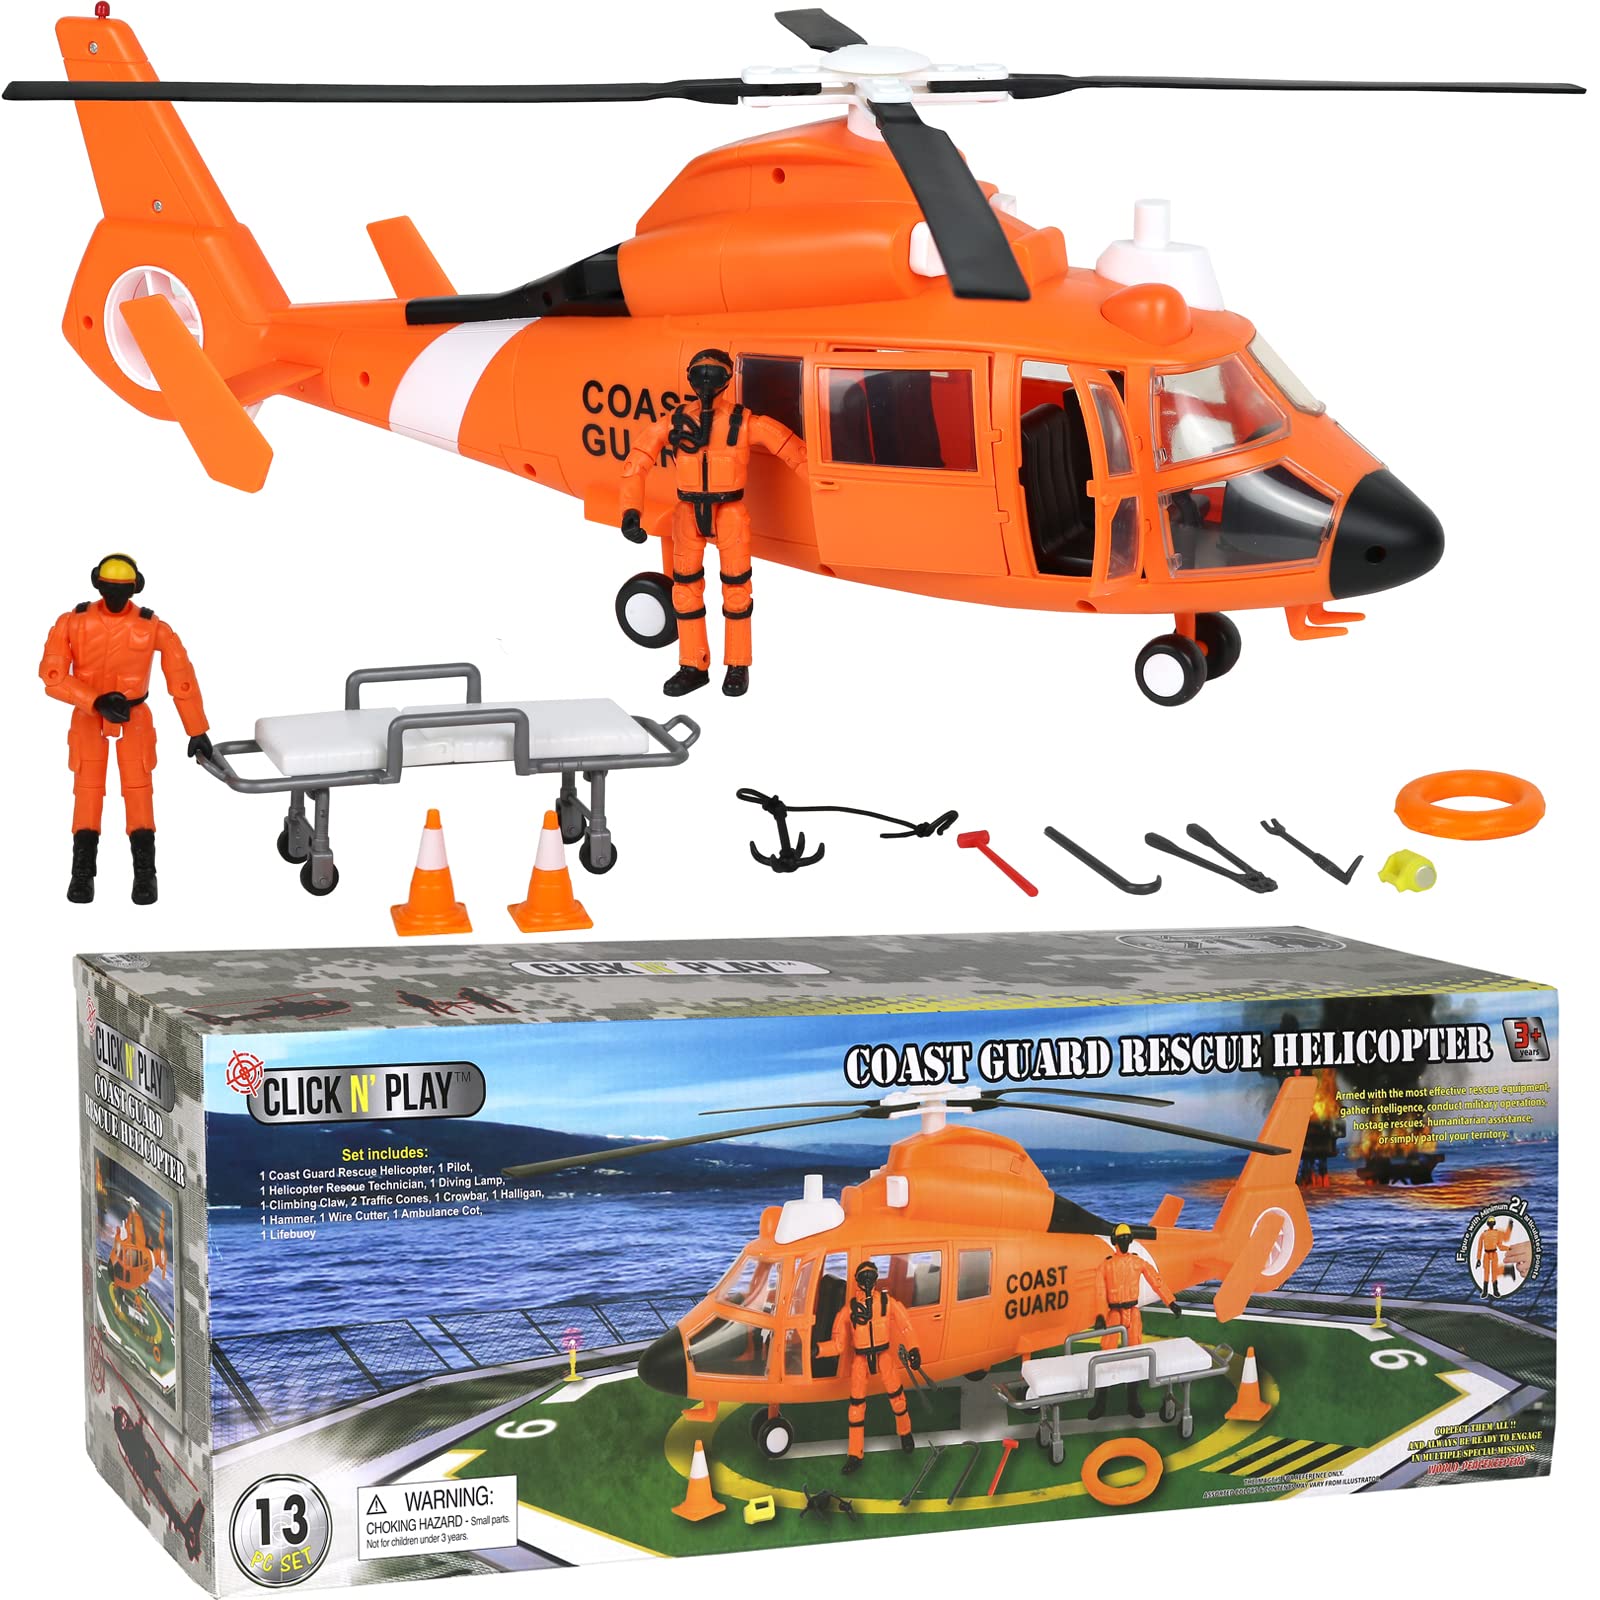 Click N' Play Toy Helicopter Set, Coast Guard Rescue Helicopter for Kids, 13-Piece Play Set Including Coast Guard Action Figures & Accessories , Orange